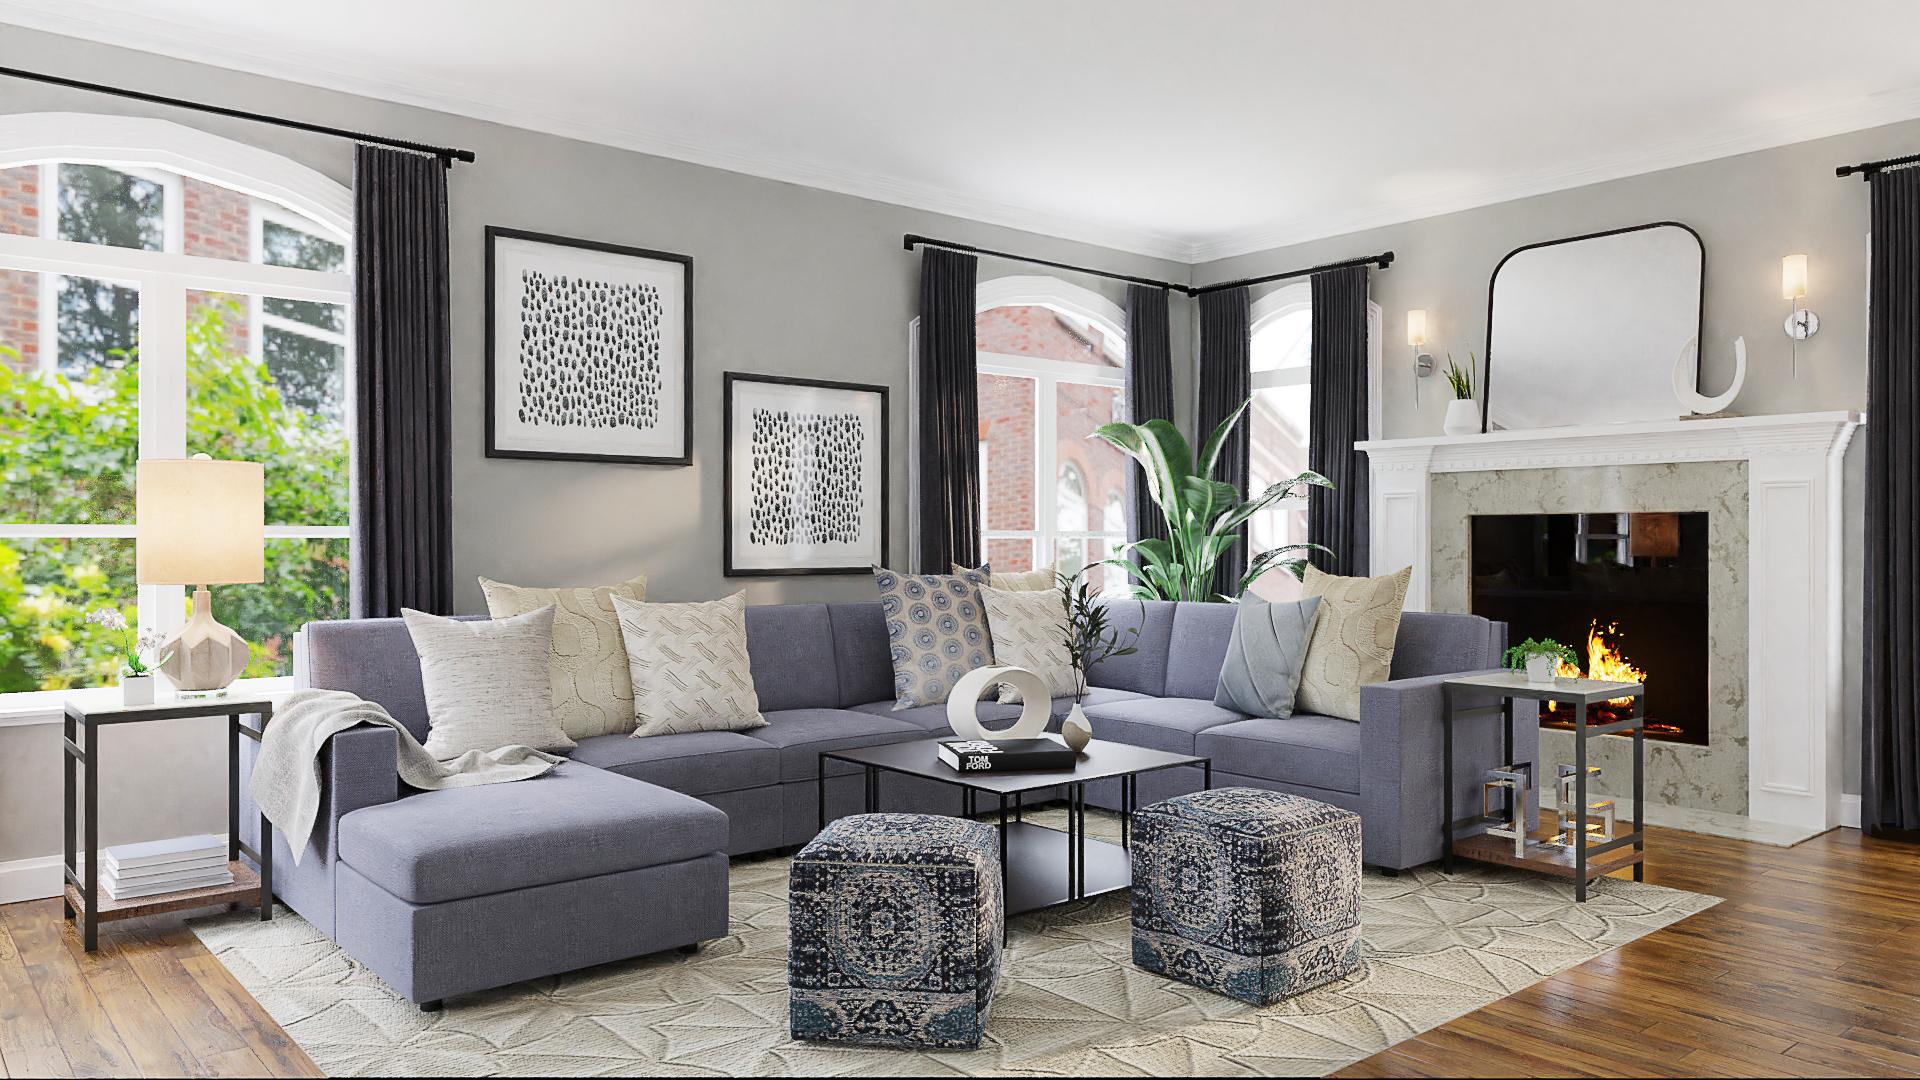 A Transitional Living Room In Periwinkle Blue